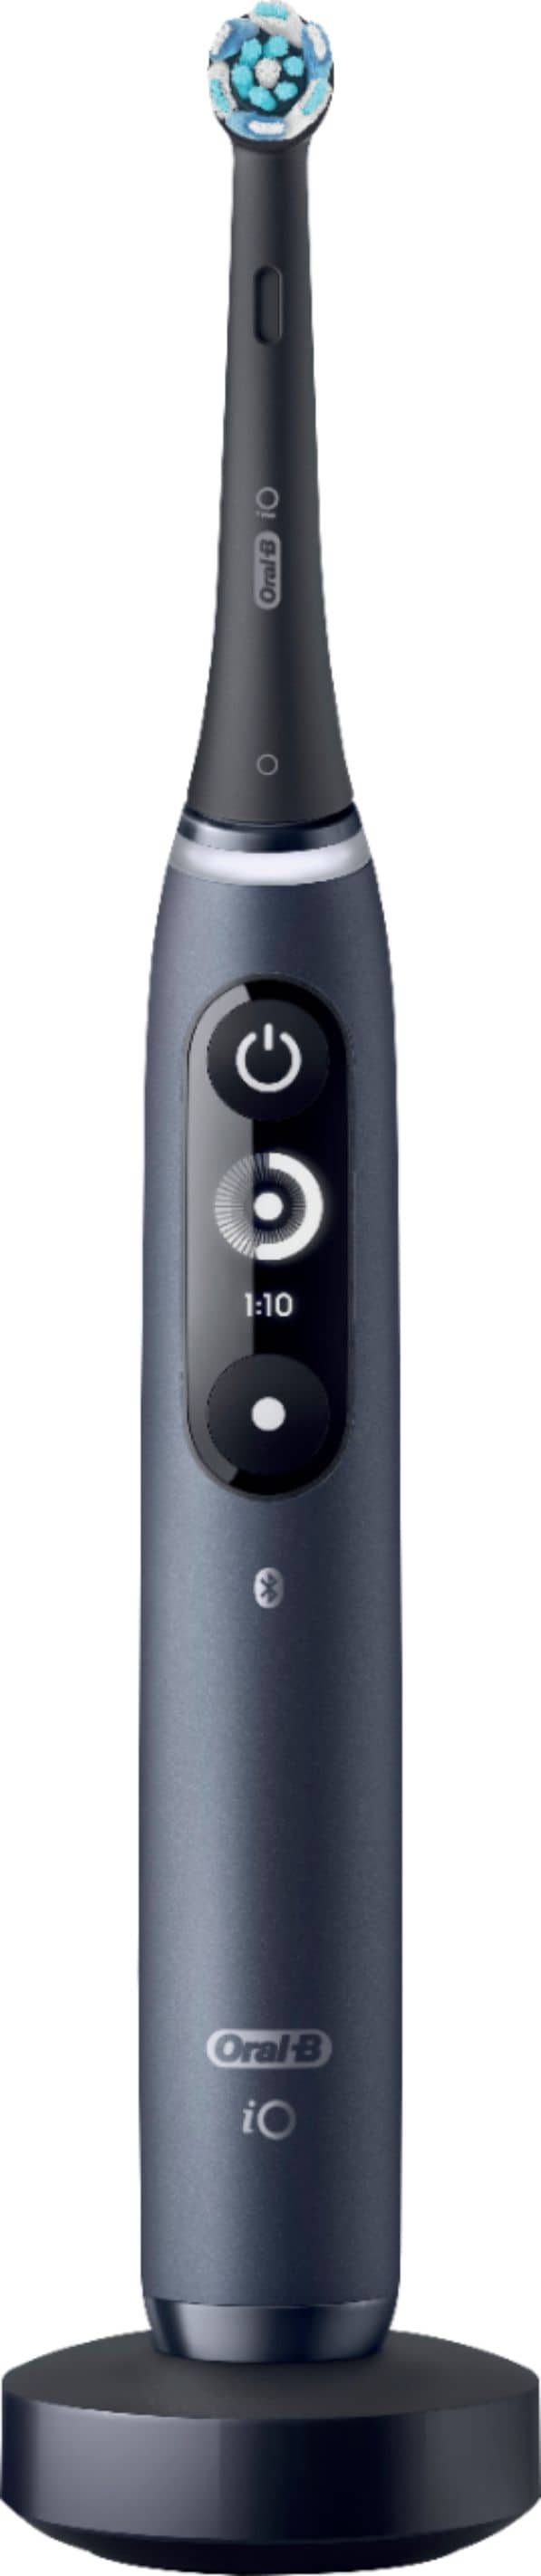 Oral-B - iO Series 7 Connected Rechargeable Electric Toothbrush - Onyx Black_1